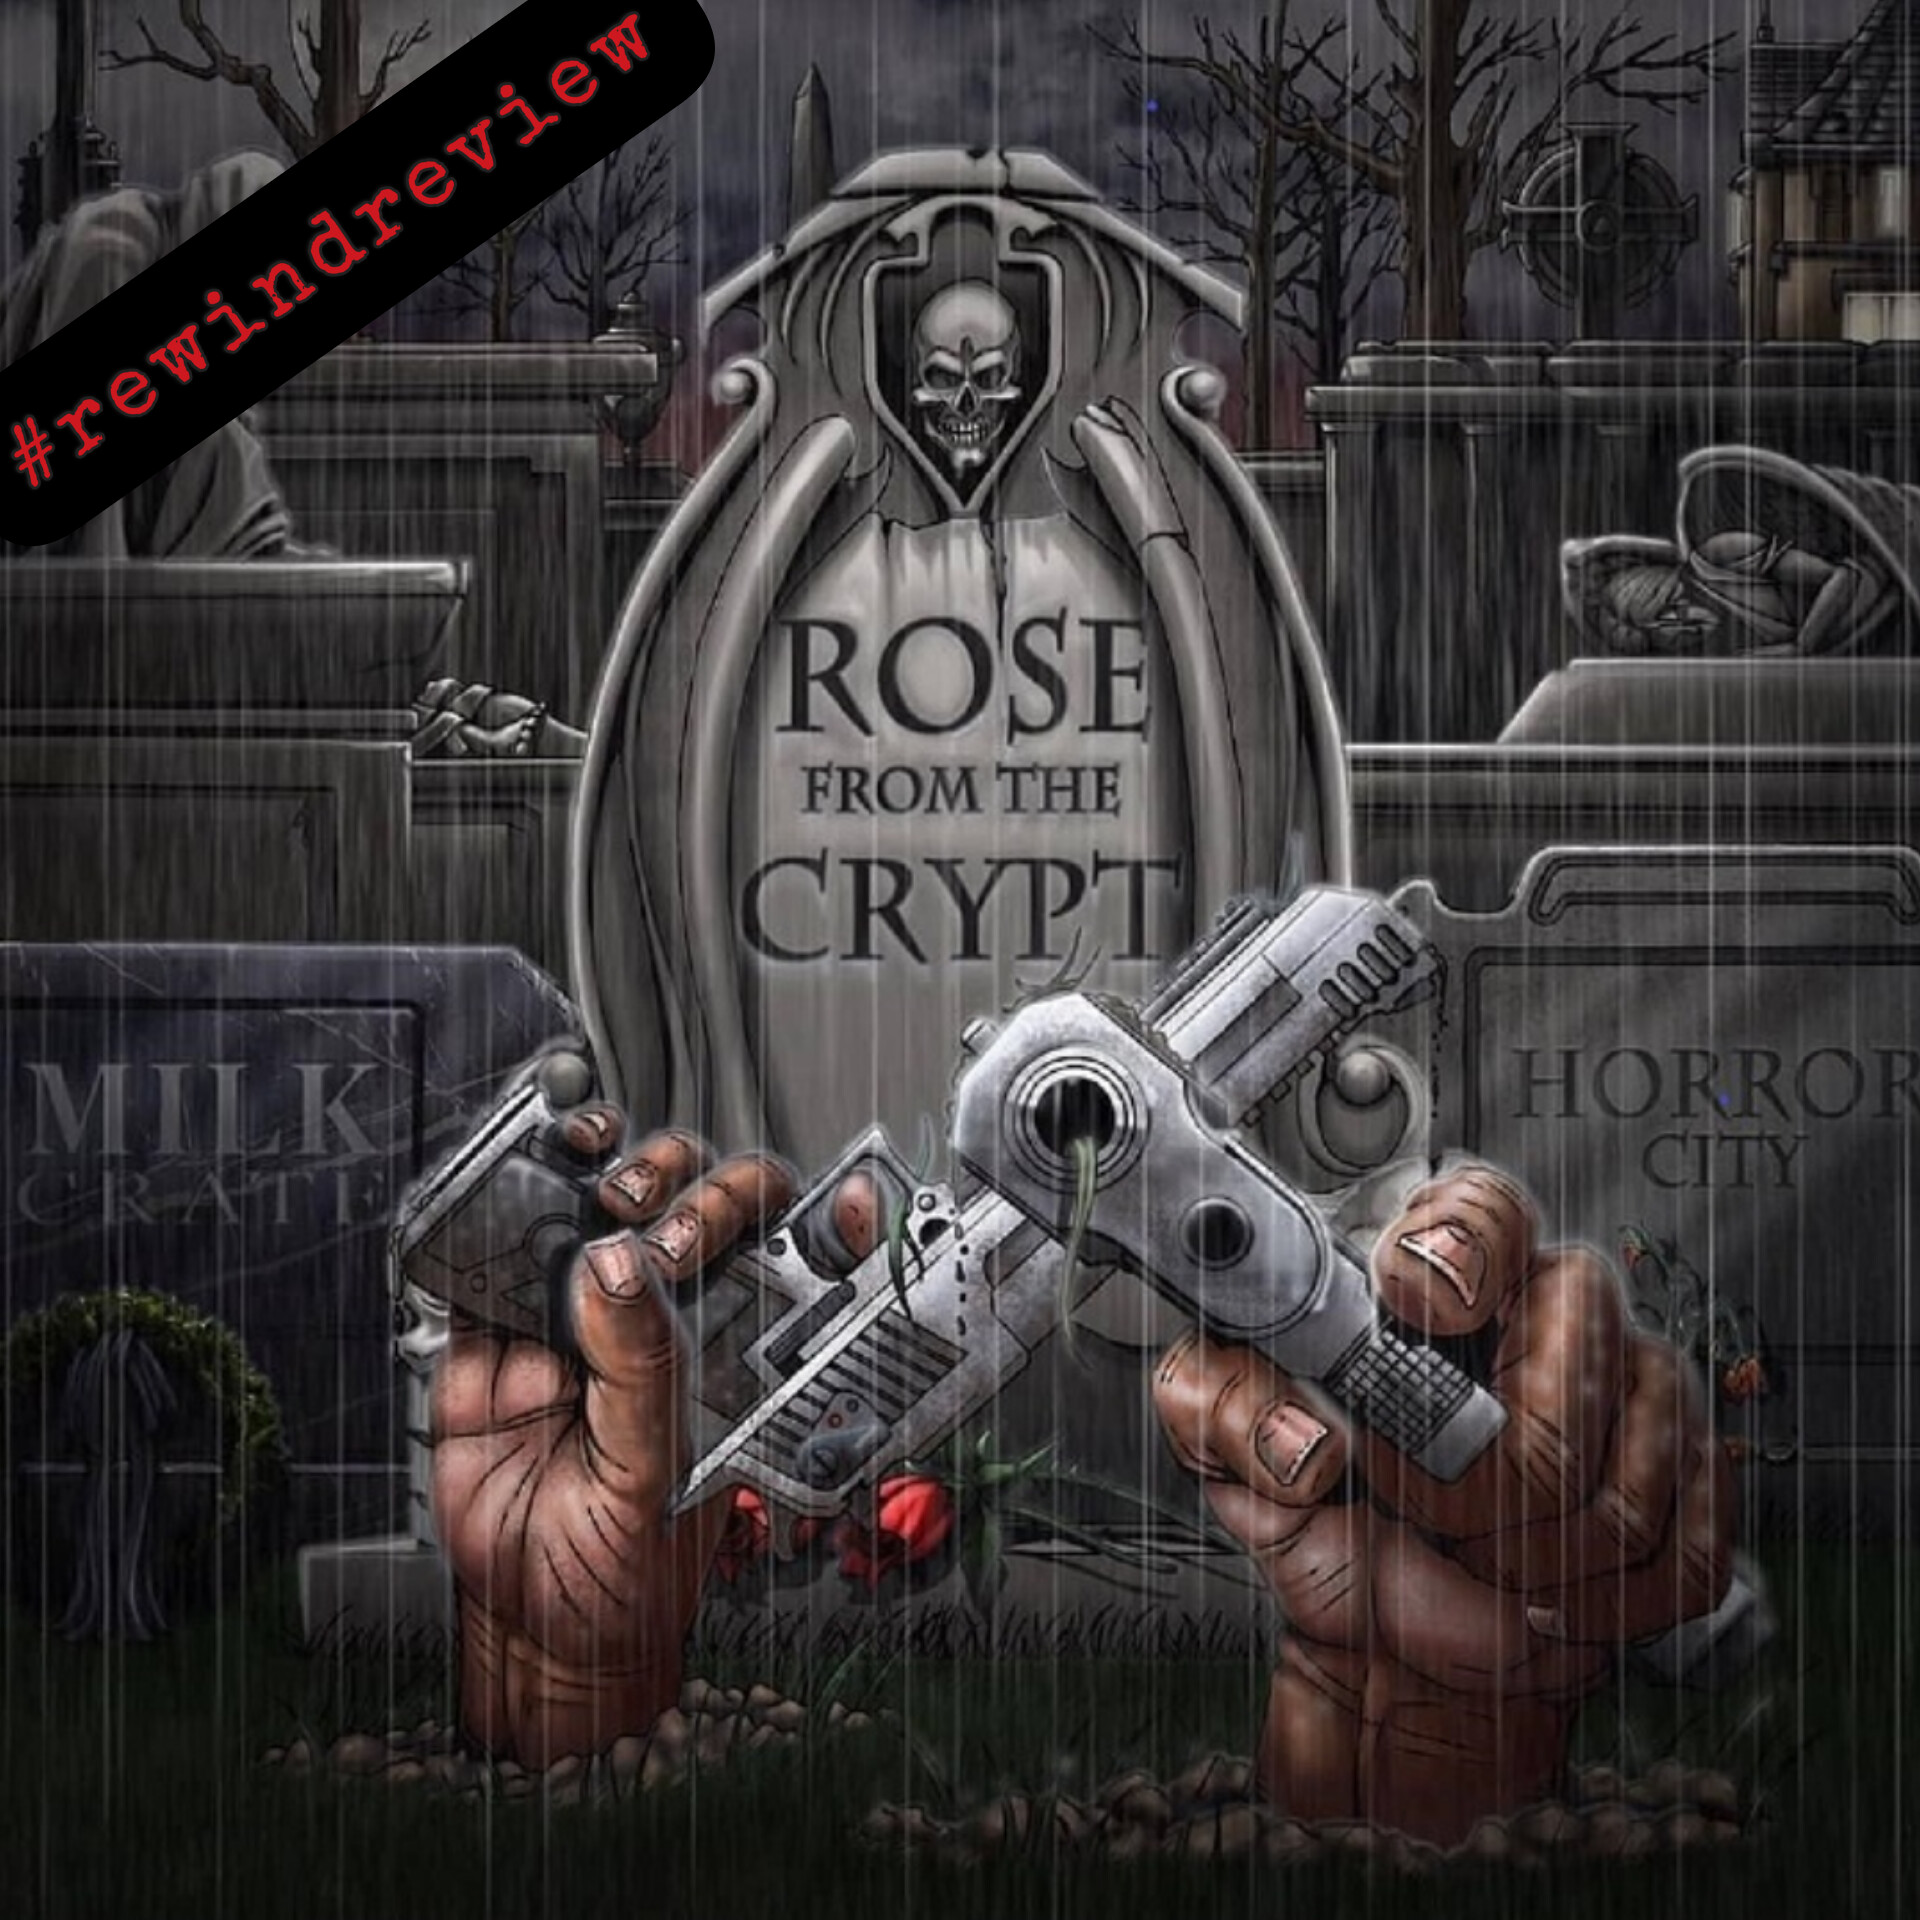 #rewindreview: Horror City ‘Rose From The Crypt’ EP 2020